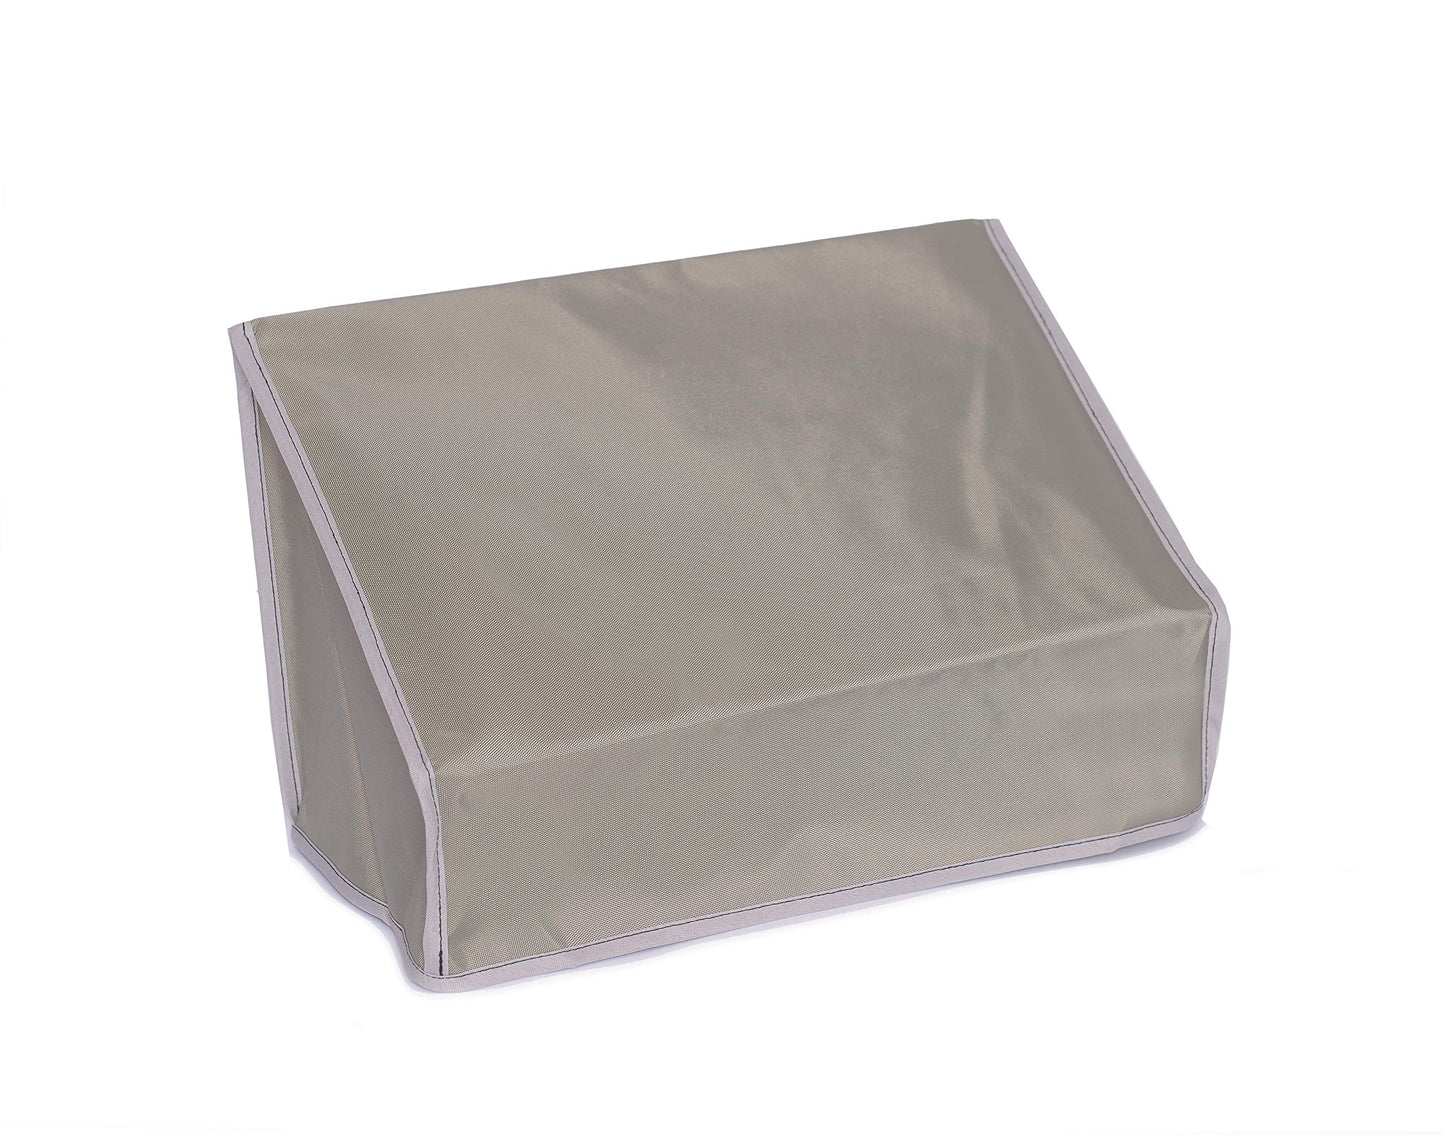 The Perfect Dust Cover, Silver Gray Nylon Cover for HP Scanjet Pro 3000 s3 Sheet-Feed Scanner, Anti Static, Waterproof Cover Dimensions 12.2''W x 7.8''D x 7.5''H by The Perfect Dust Cover LLC